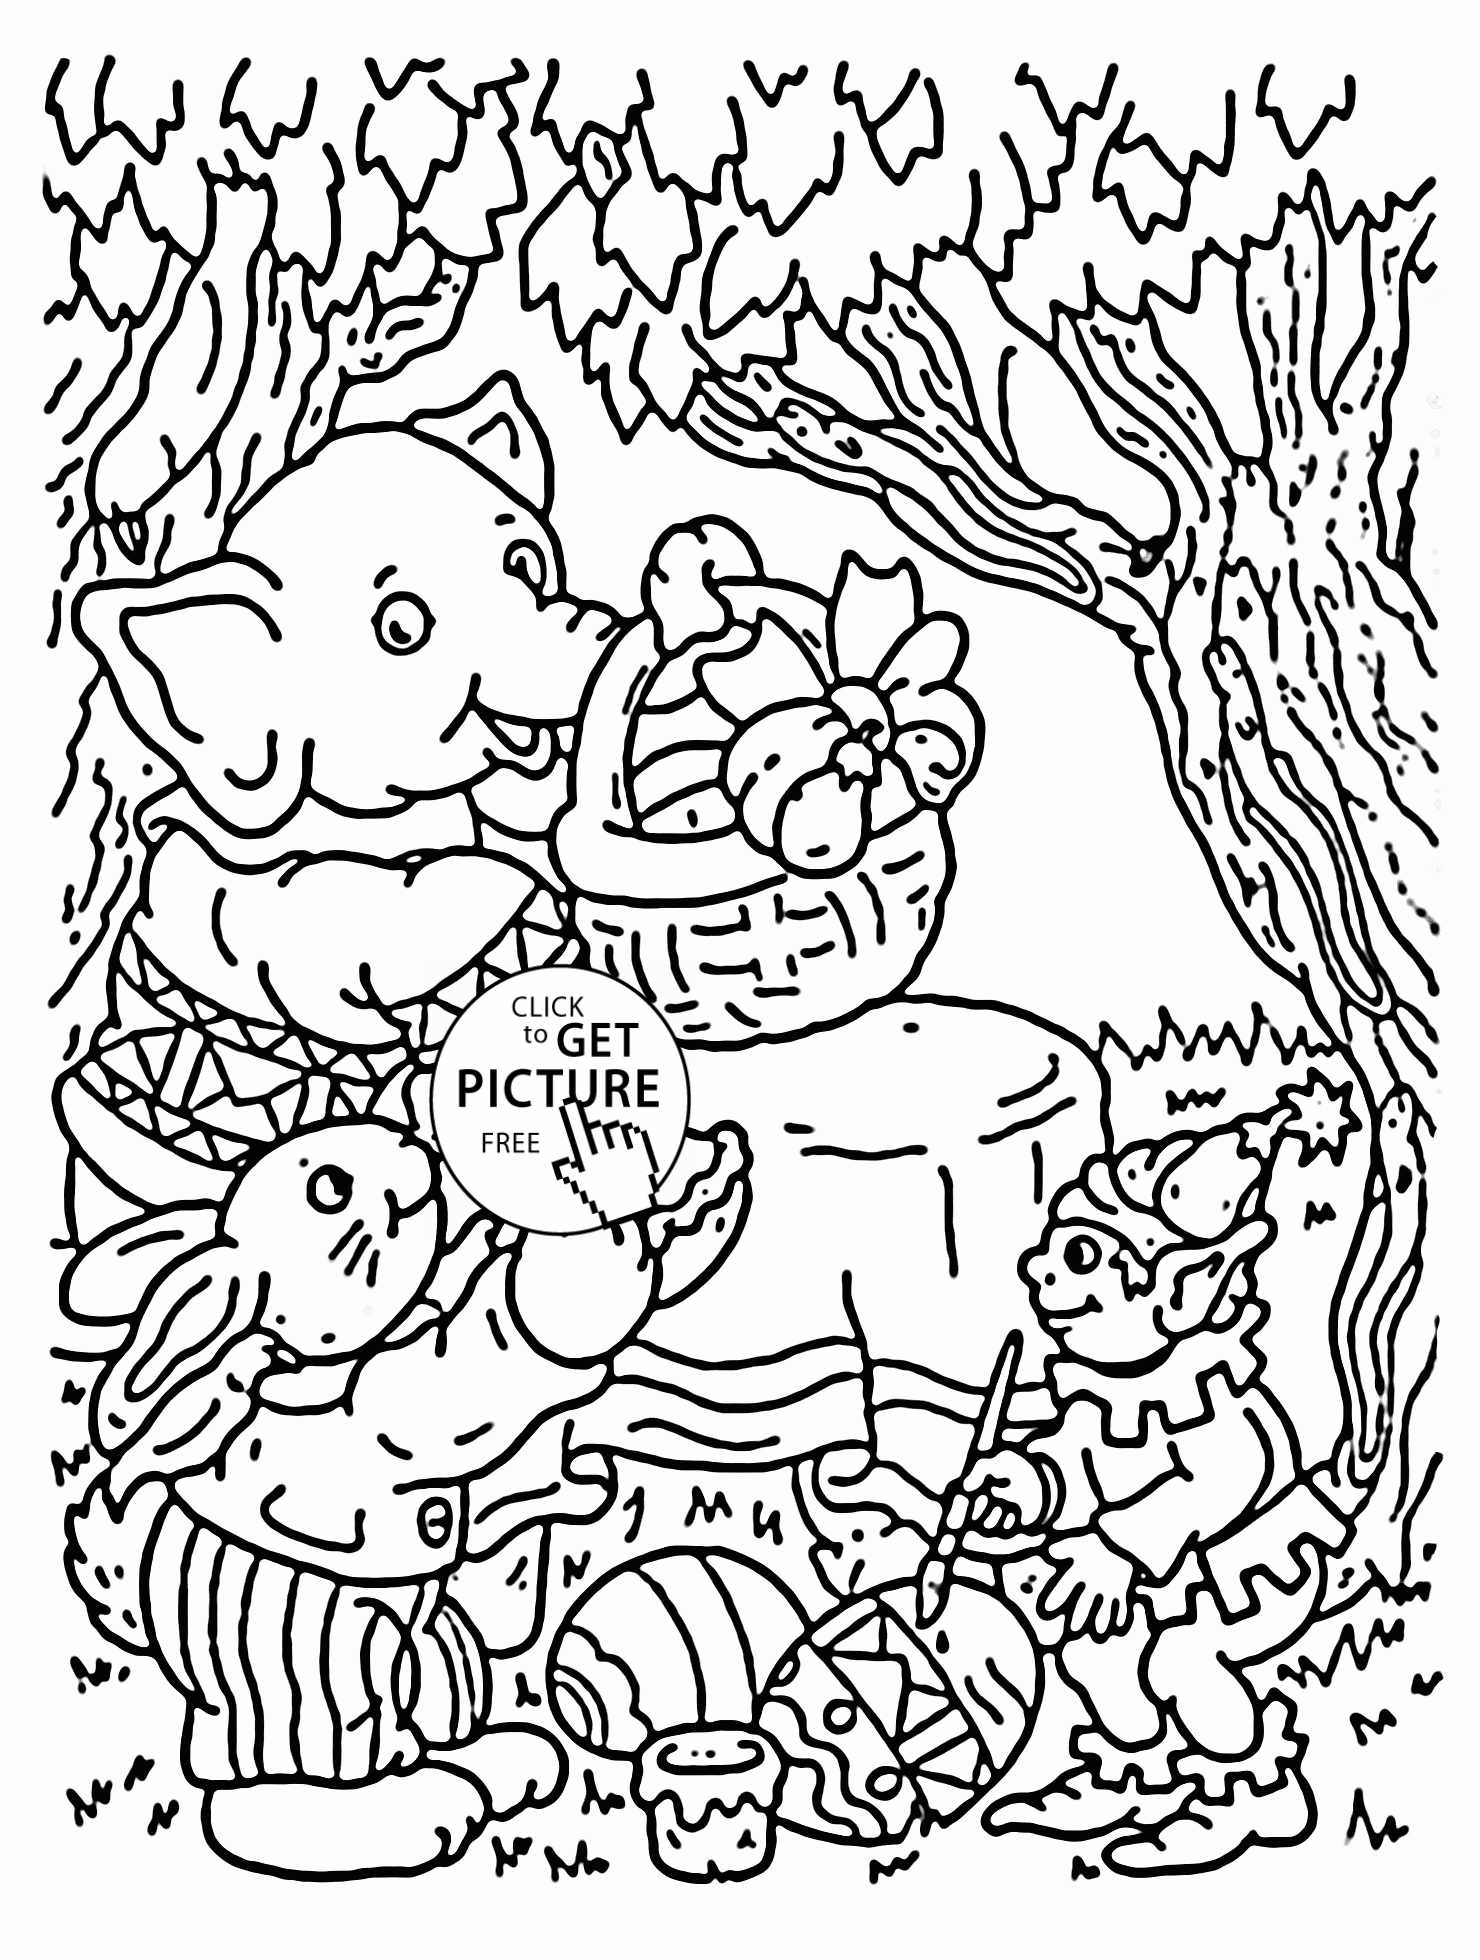 Connect the Dots Worksheets and Easter In the forest Coloring Page for Kids Coloring Pages Printab